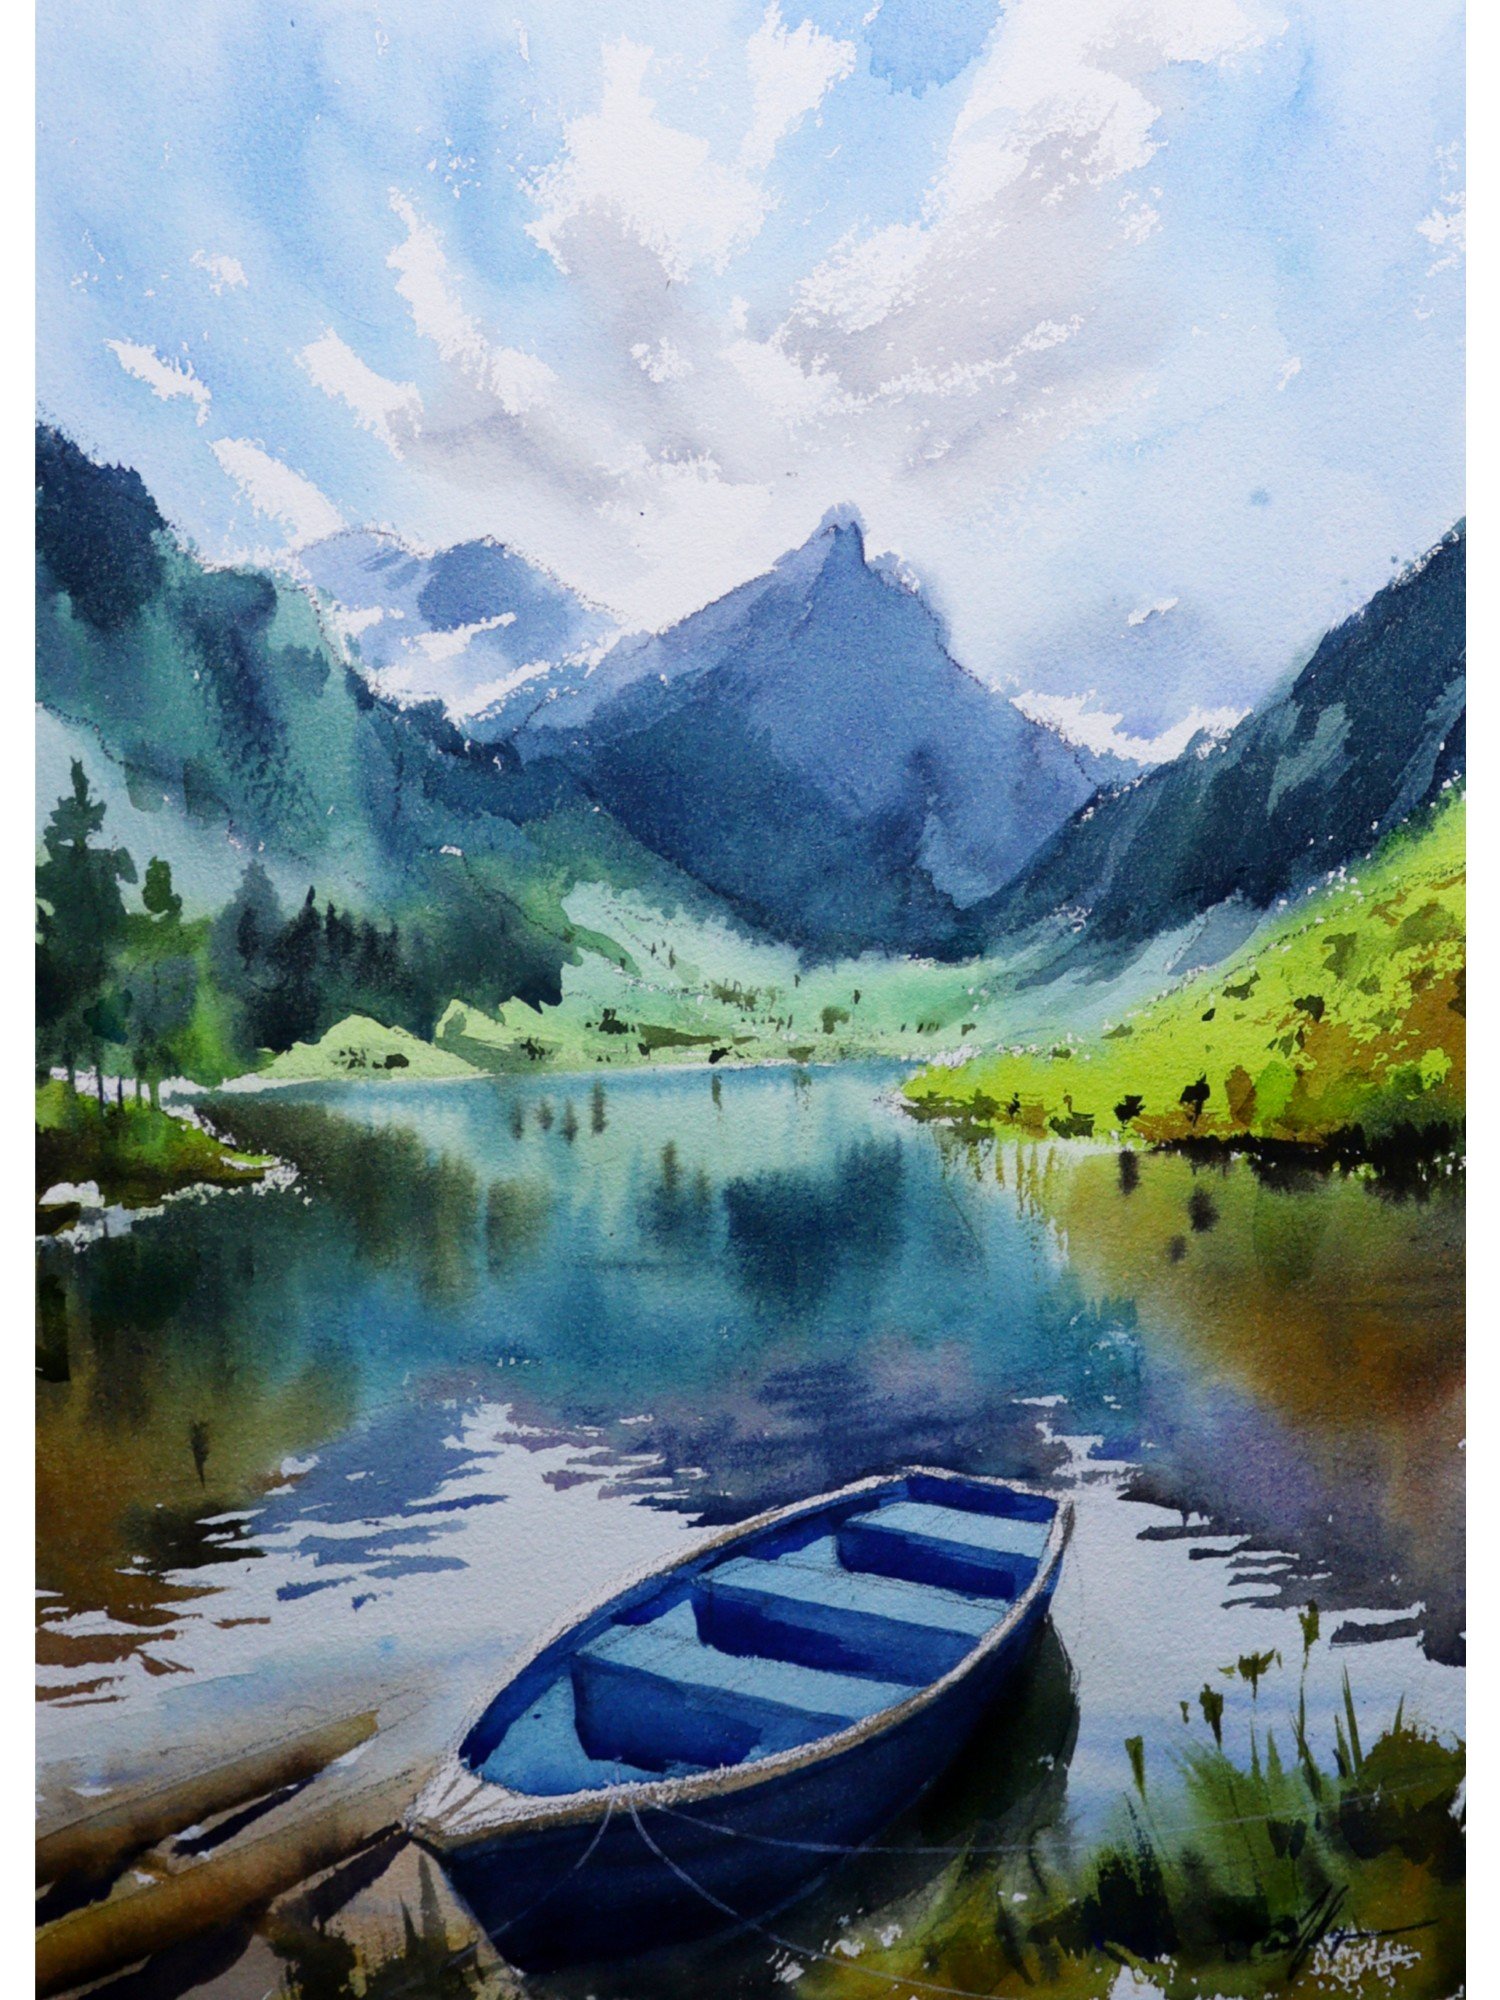 What do you think about this painting? : r/Watercolor